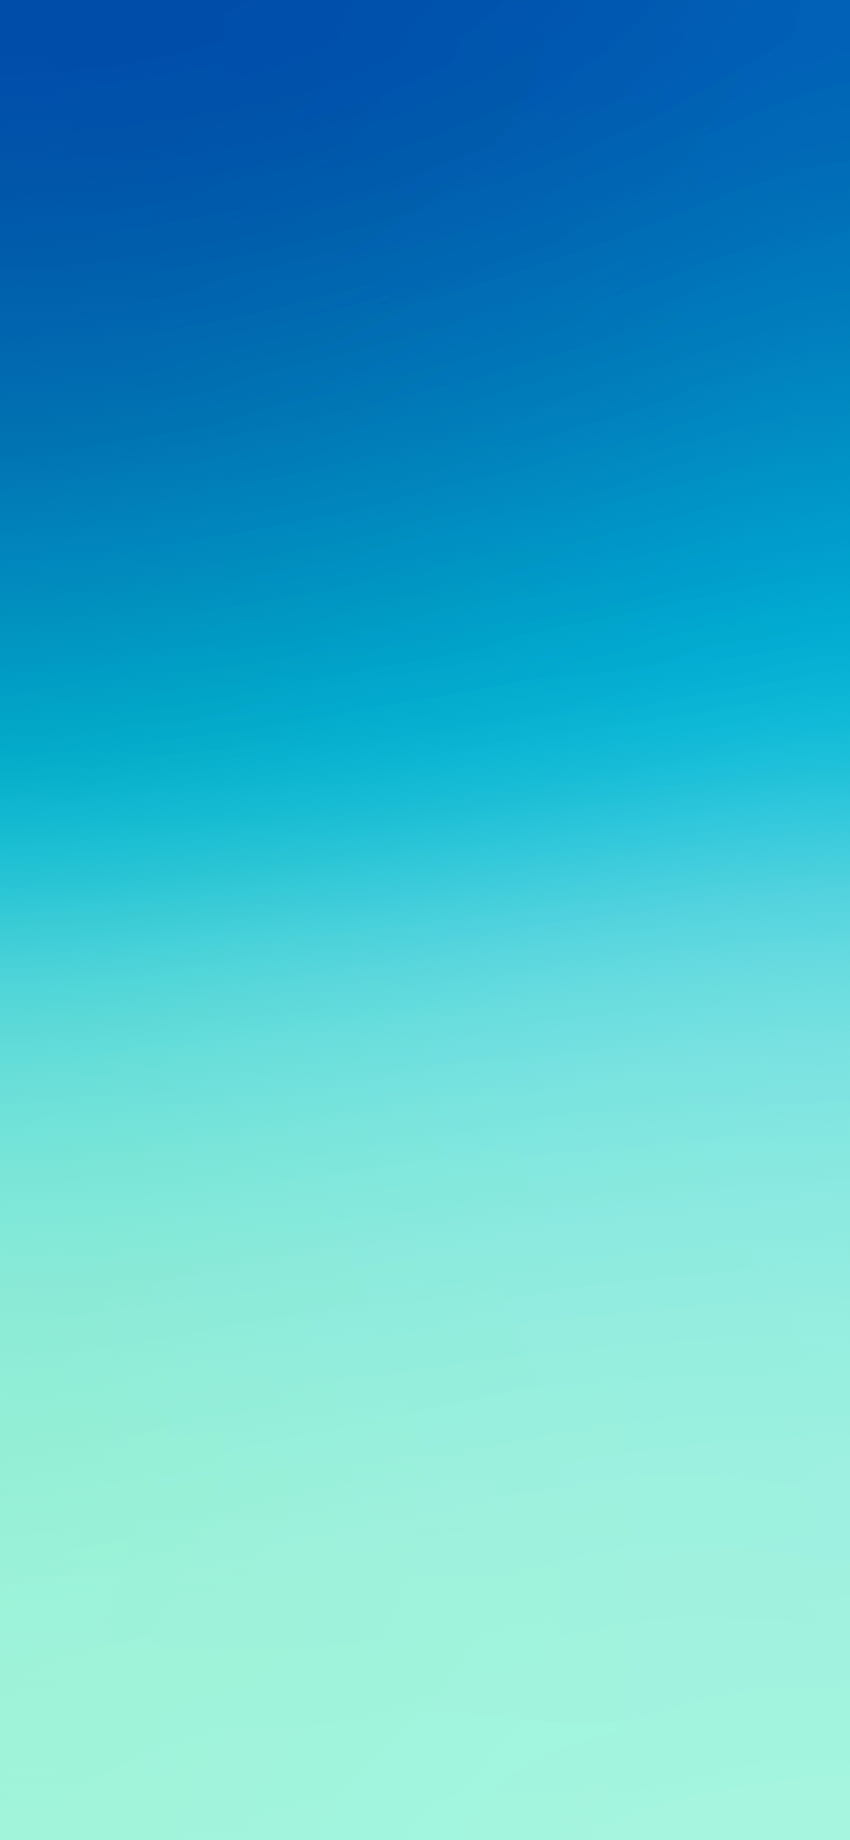 Gradient Colors for iPhone 11, Pro Max, X, 8, 7, 6, color gradient iphone HD phone wallpaper